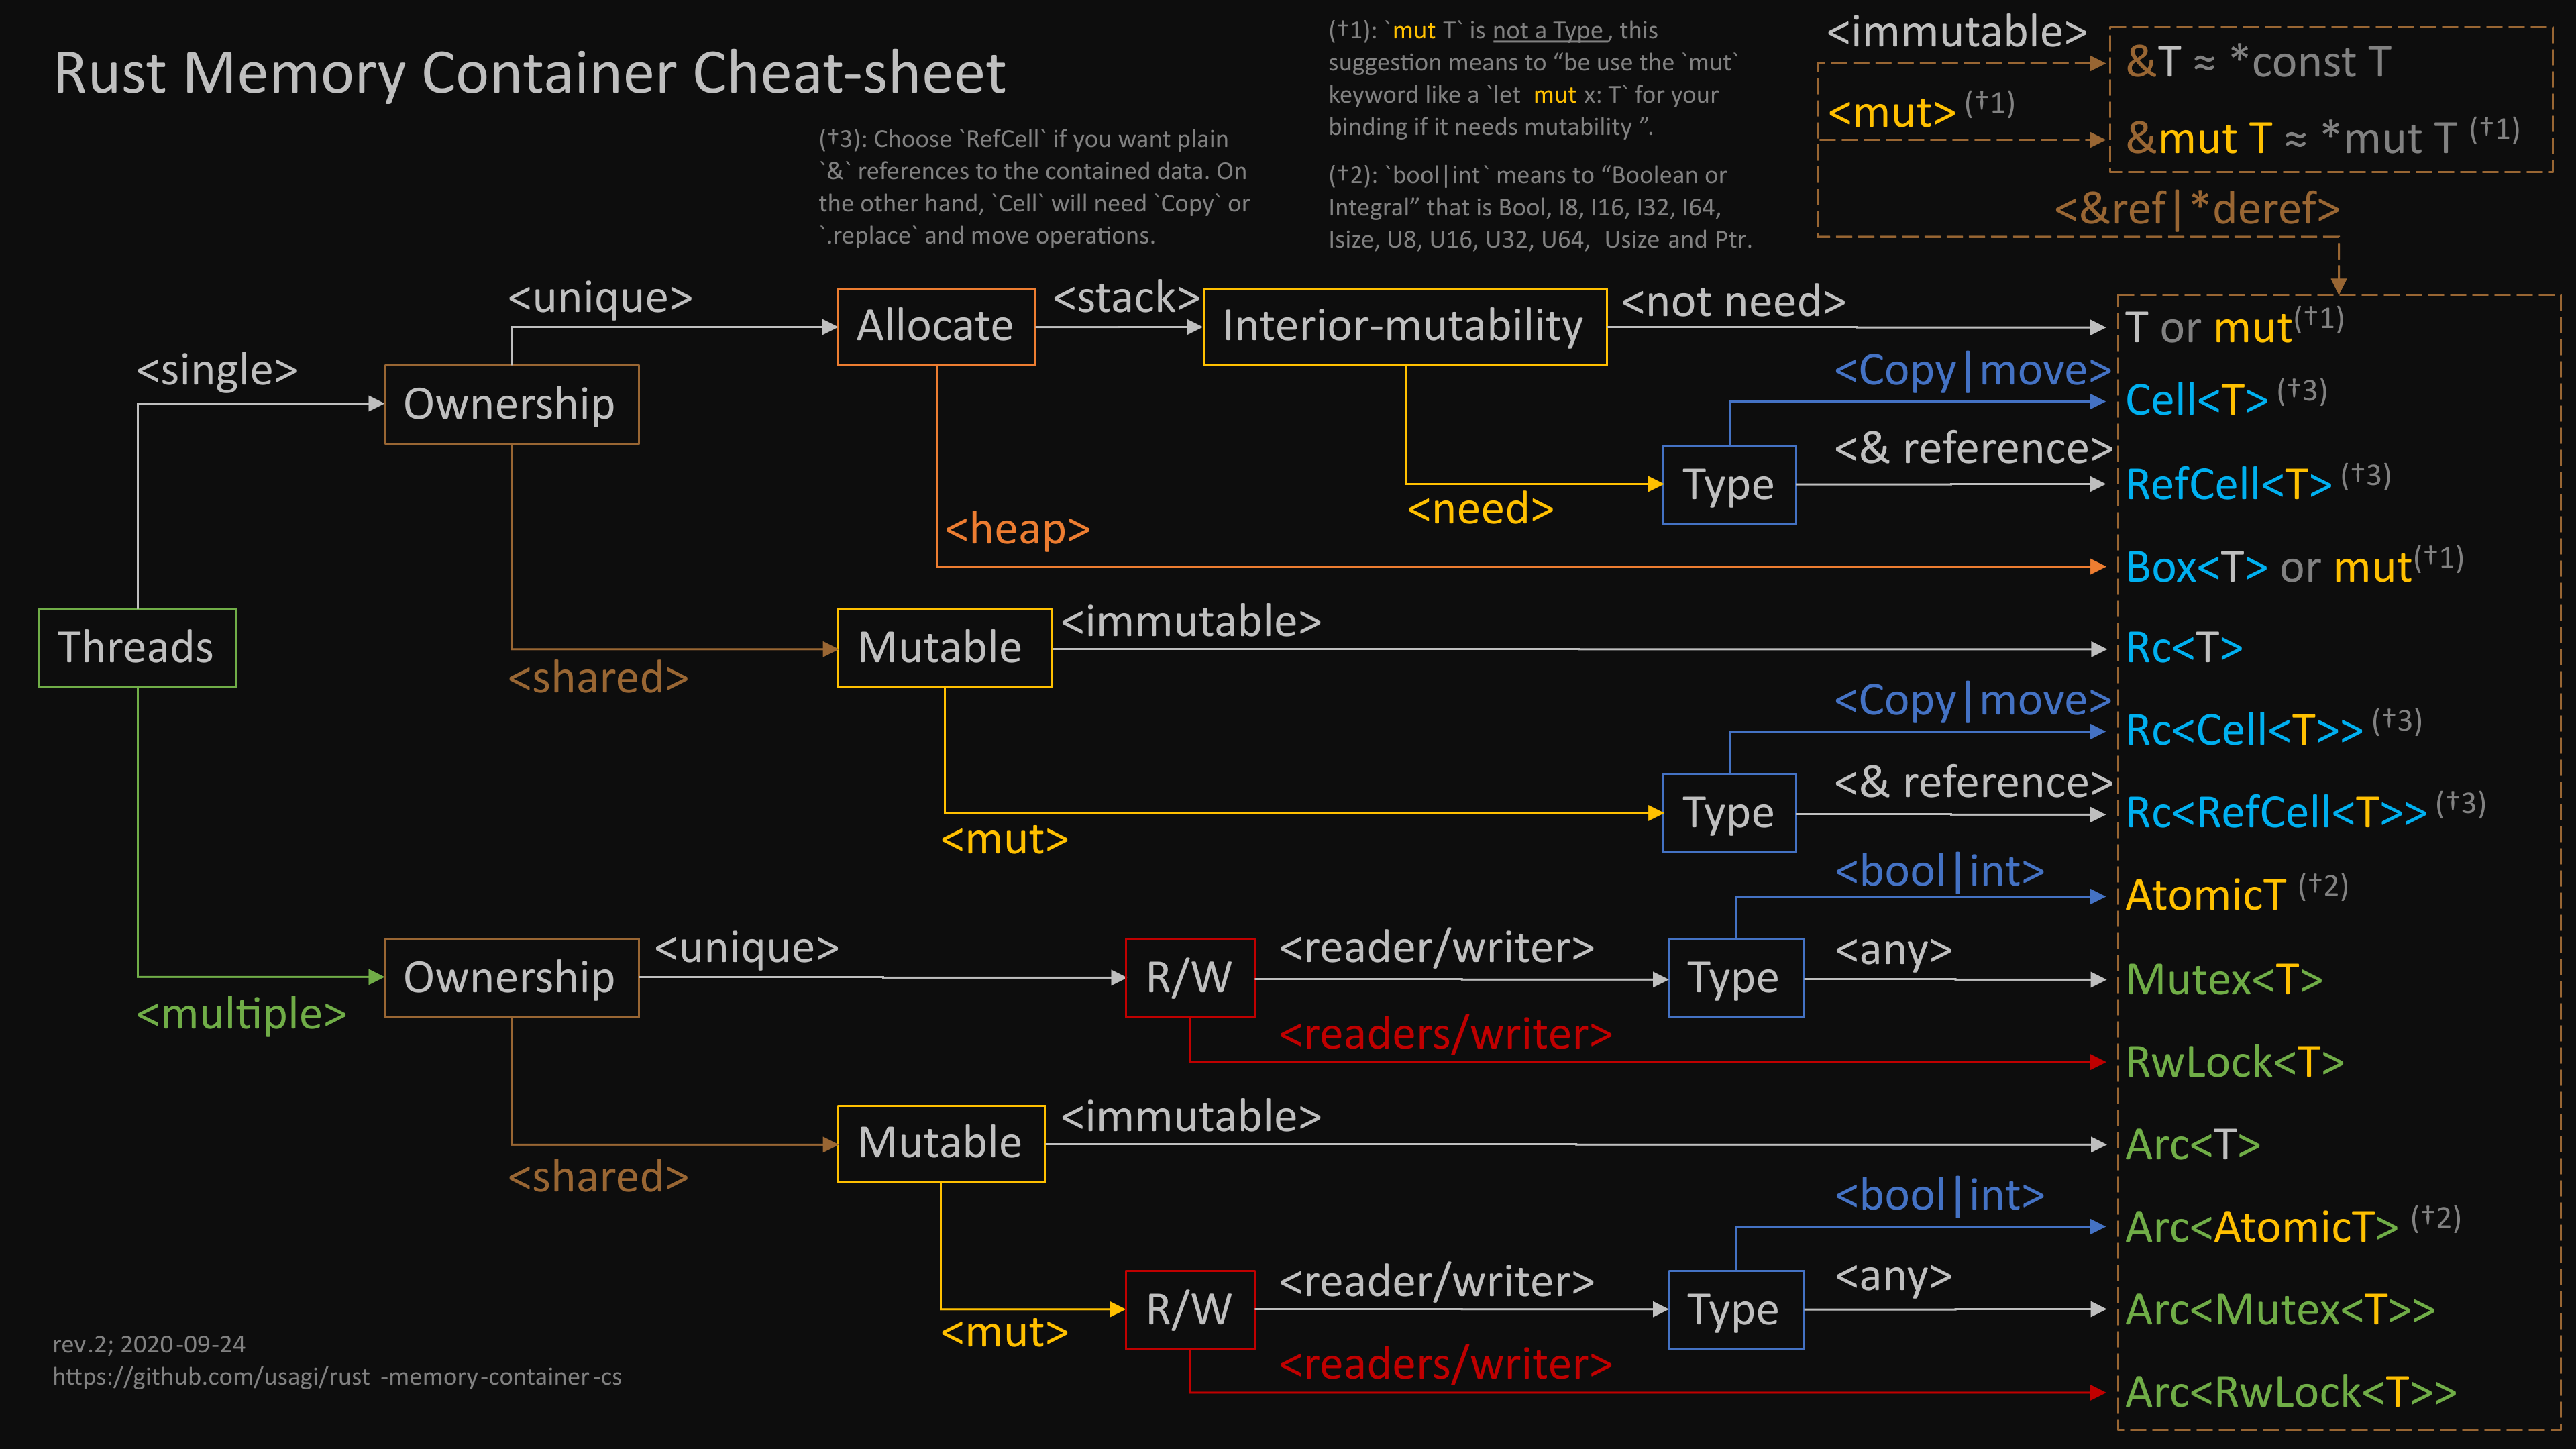 Rust Memory Container Cheat-sheet